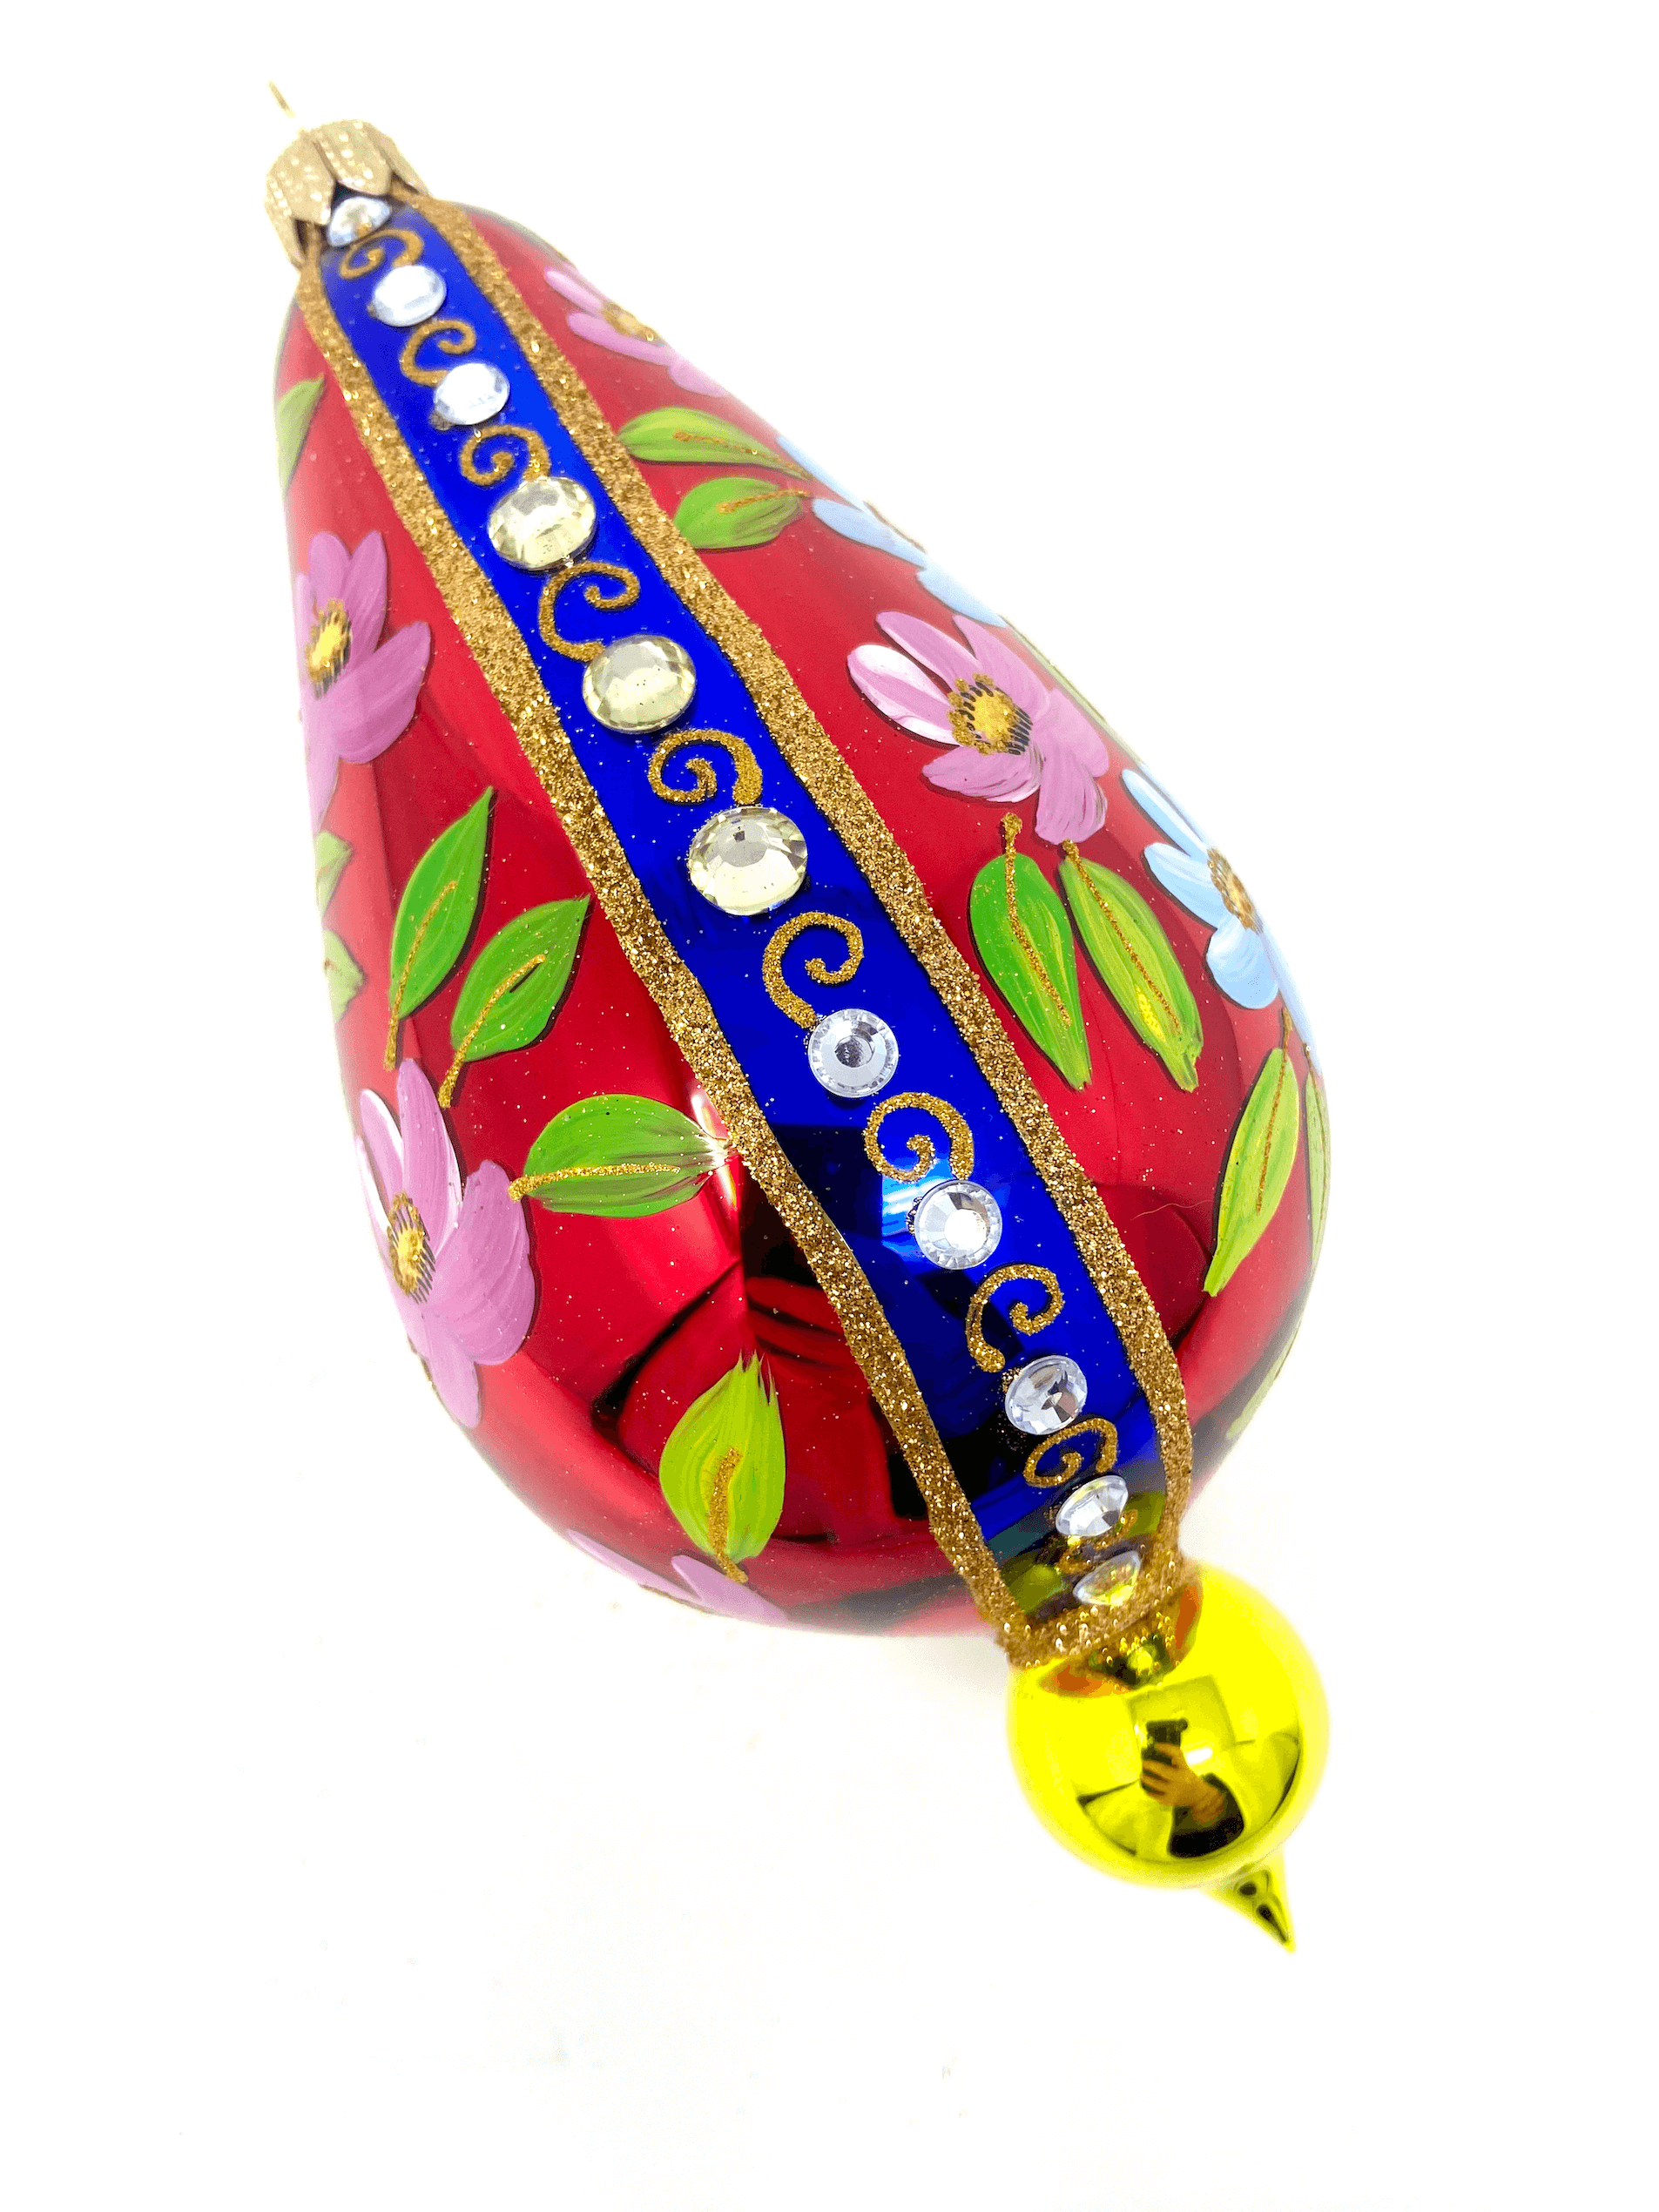 Red eggplant shaped ornament featuring gemstones, intricate gold detailing, and hand painted floral blooms. A Christmas polish glass ornament. Floral Escape Floral Fetish.